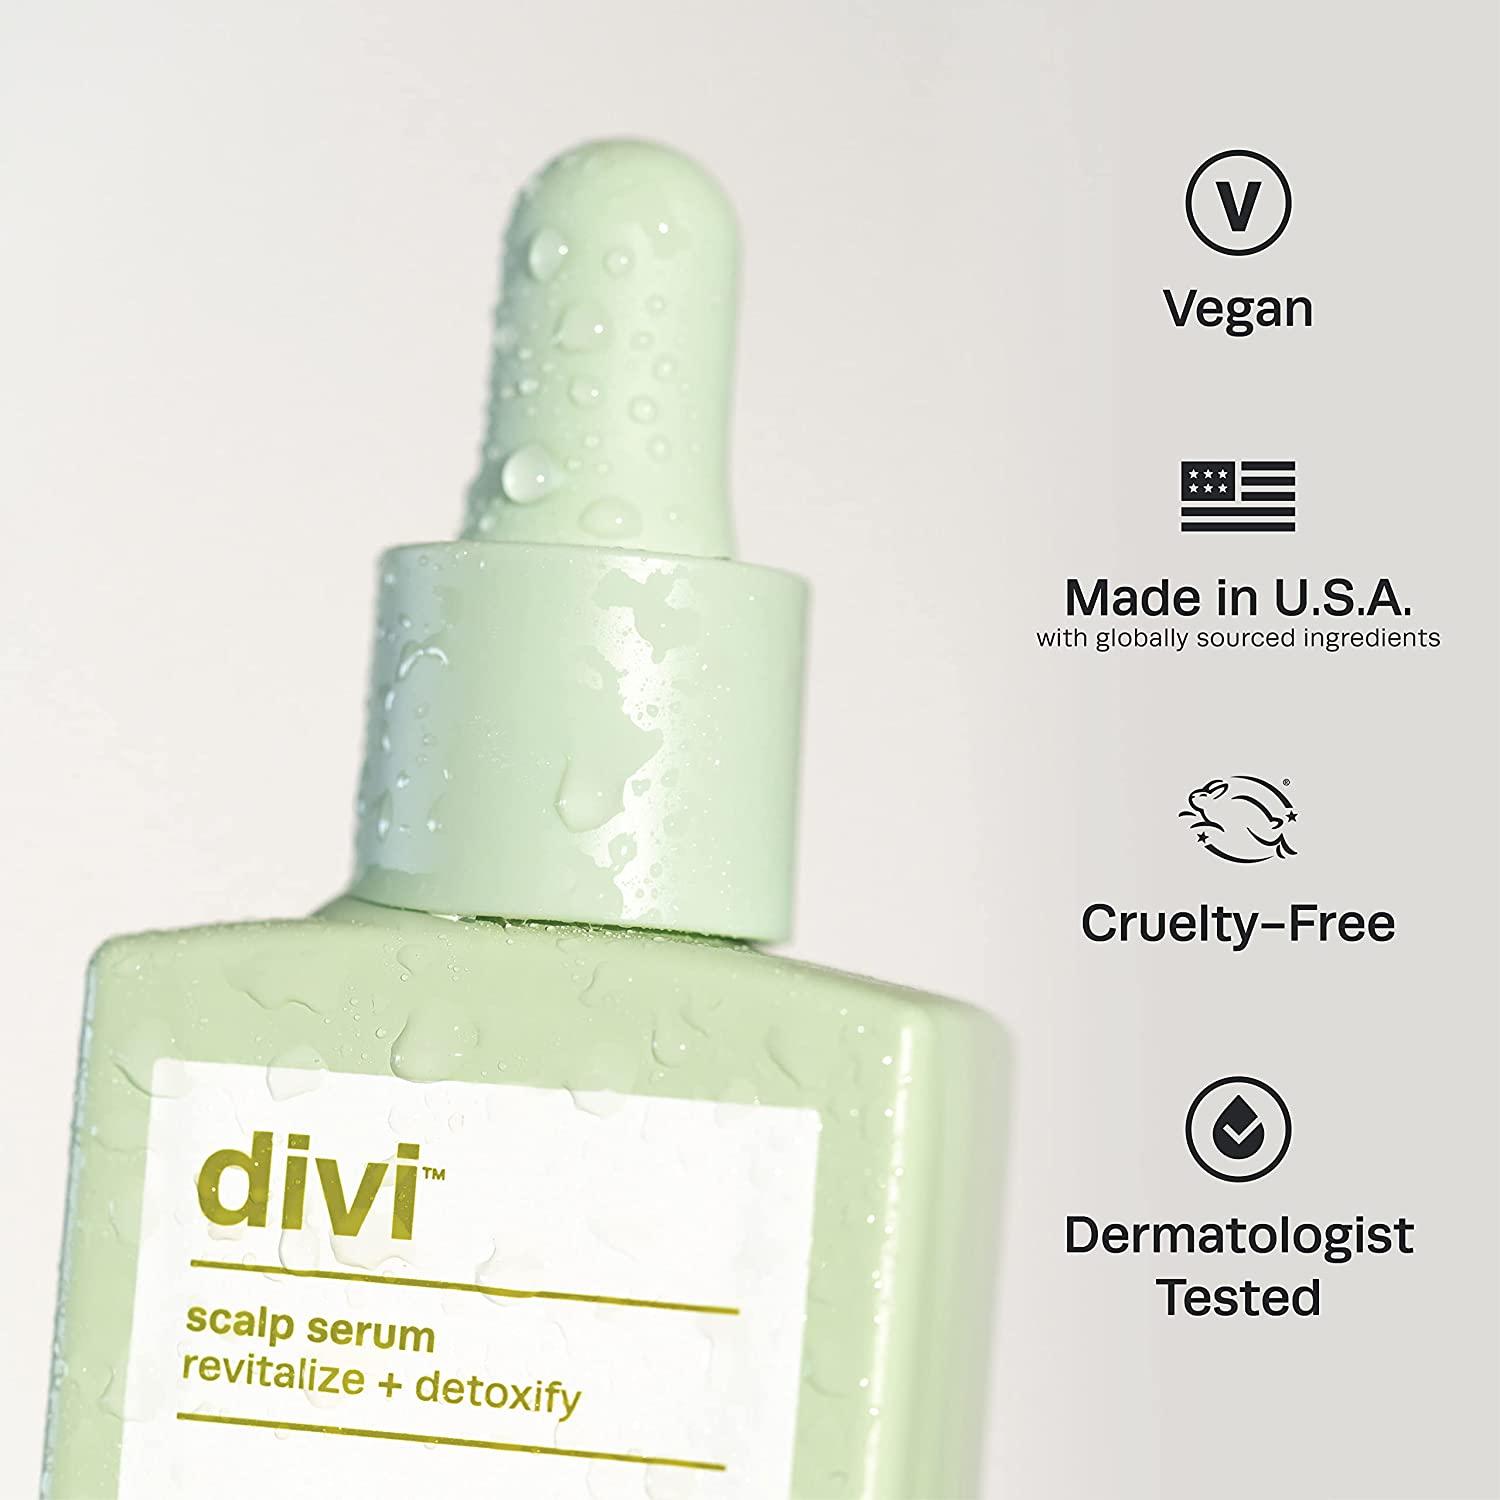 divi Hair Scalp Serum for Women and Men - Revitalize and Balance Your Scalp  - Improves Appearance of Thinning Hair, Nourishes the Scalp and Helps